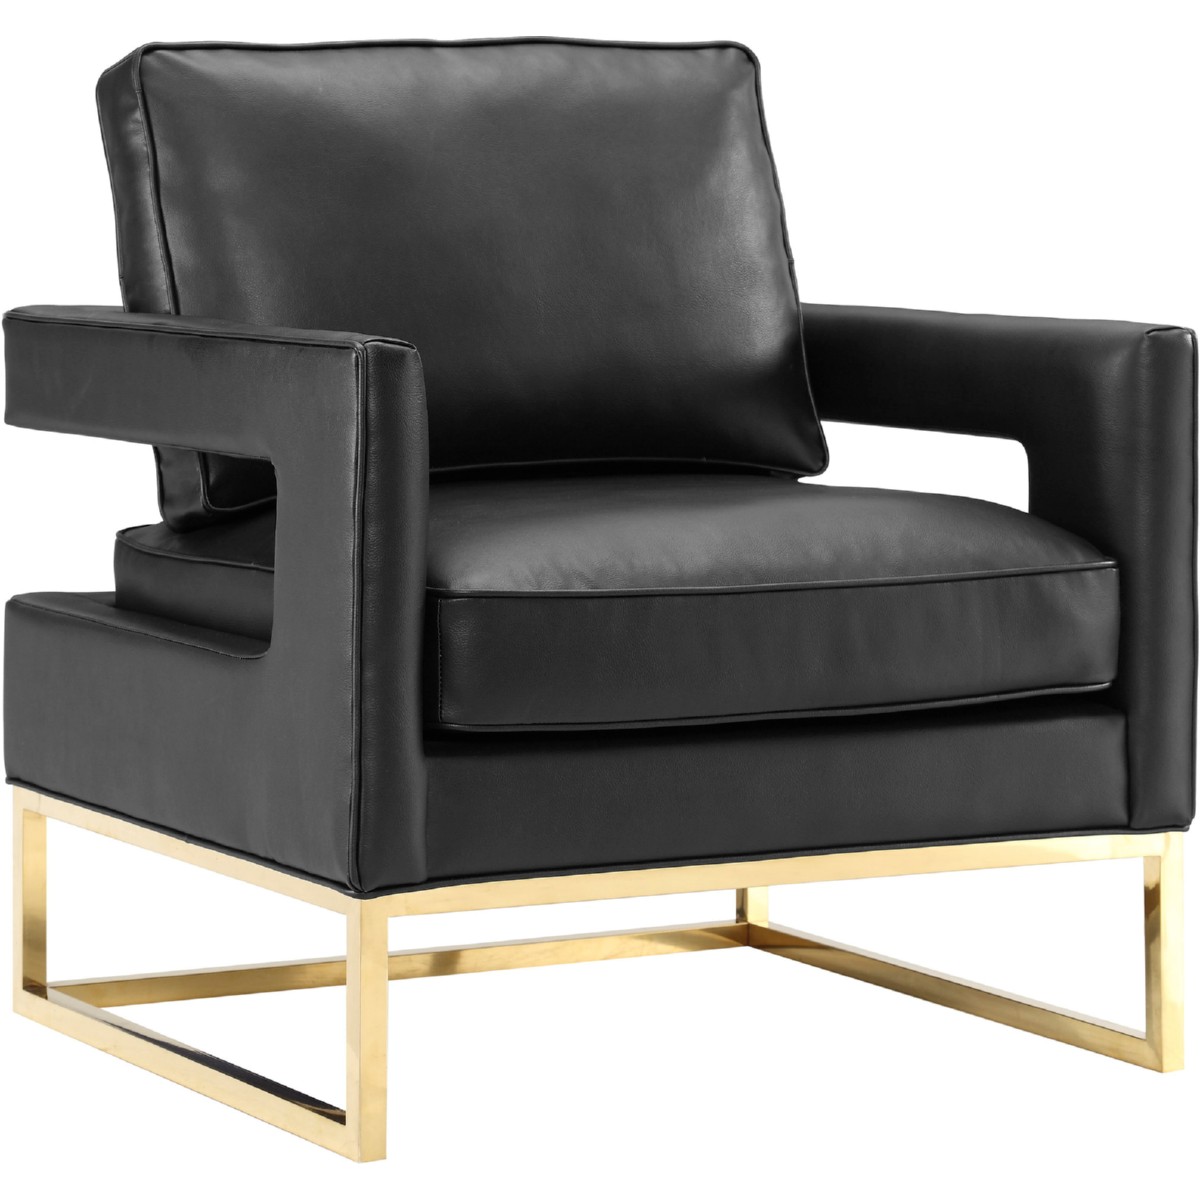 Tov-a112 Avery Leather Chair, Black